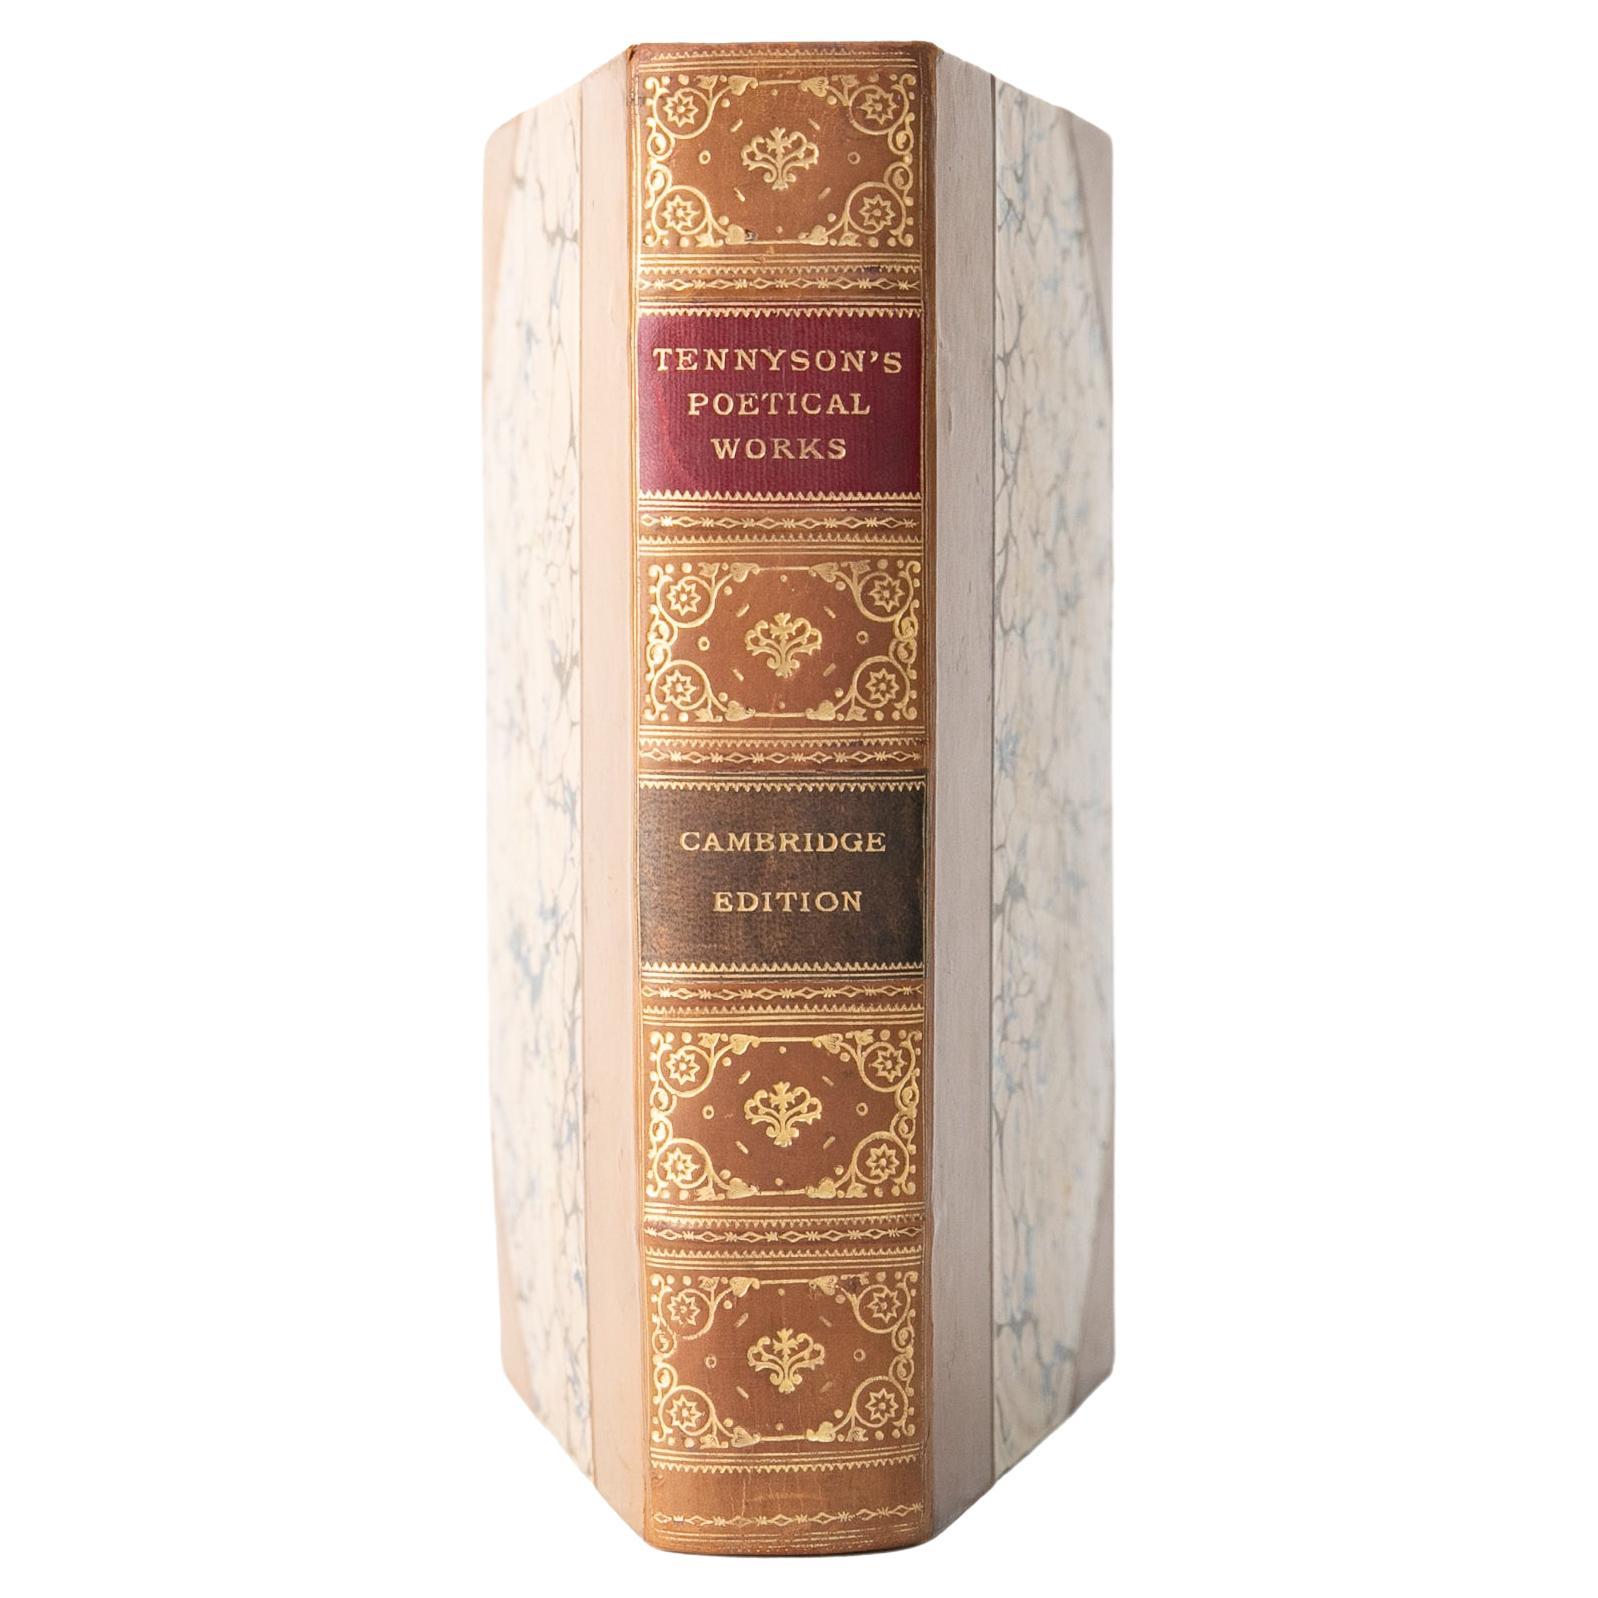 1 Volume. Alfred Lord Tennyson, the Poetical and Dramatic Works. 